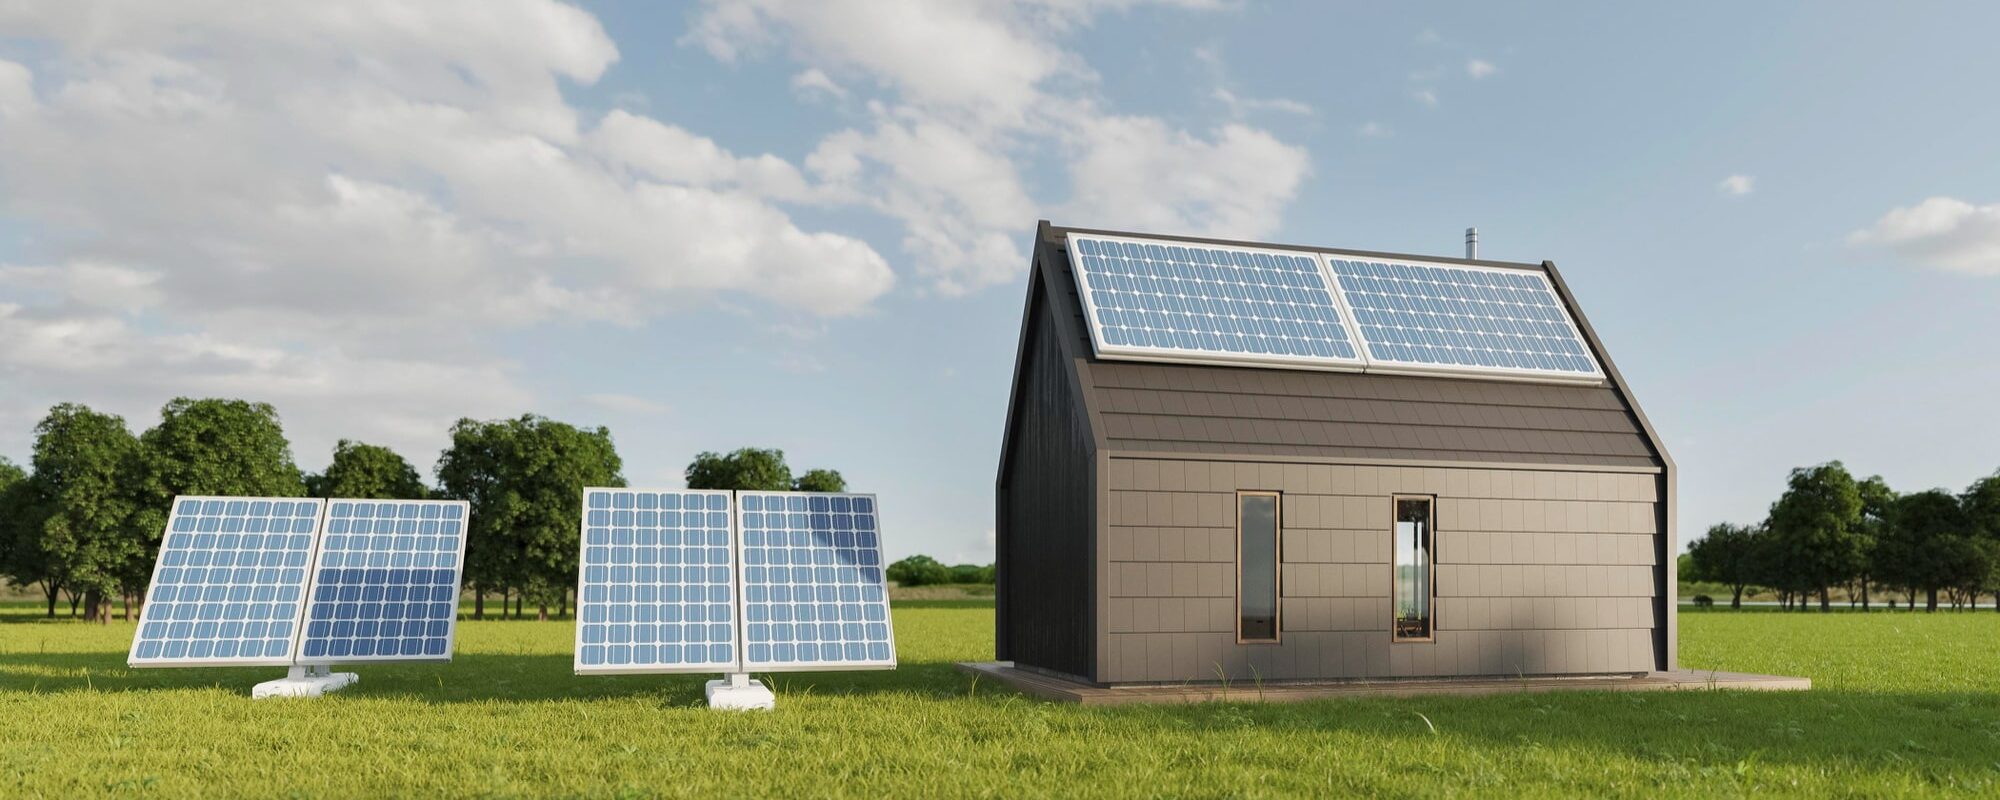 a picture showing a home with solar panel installed